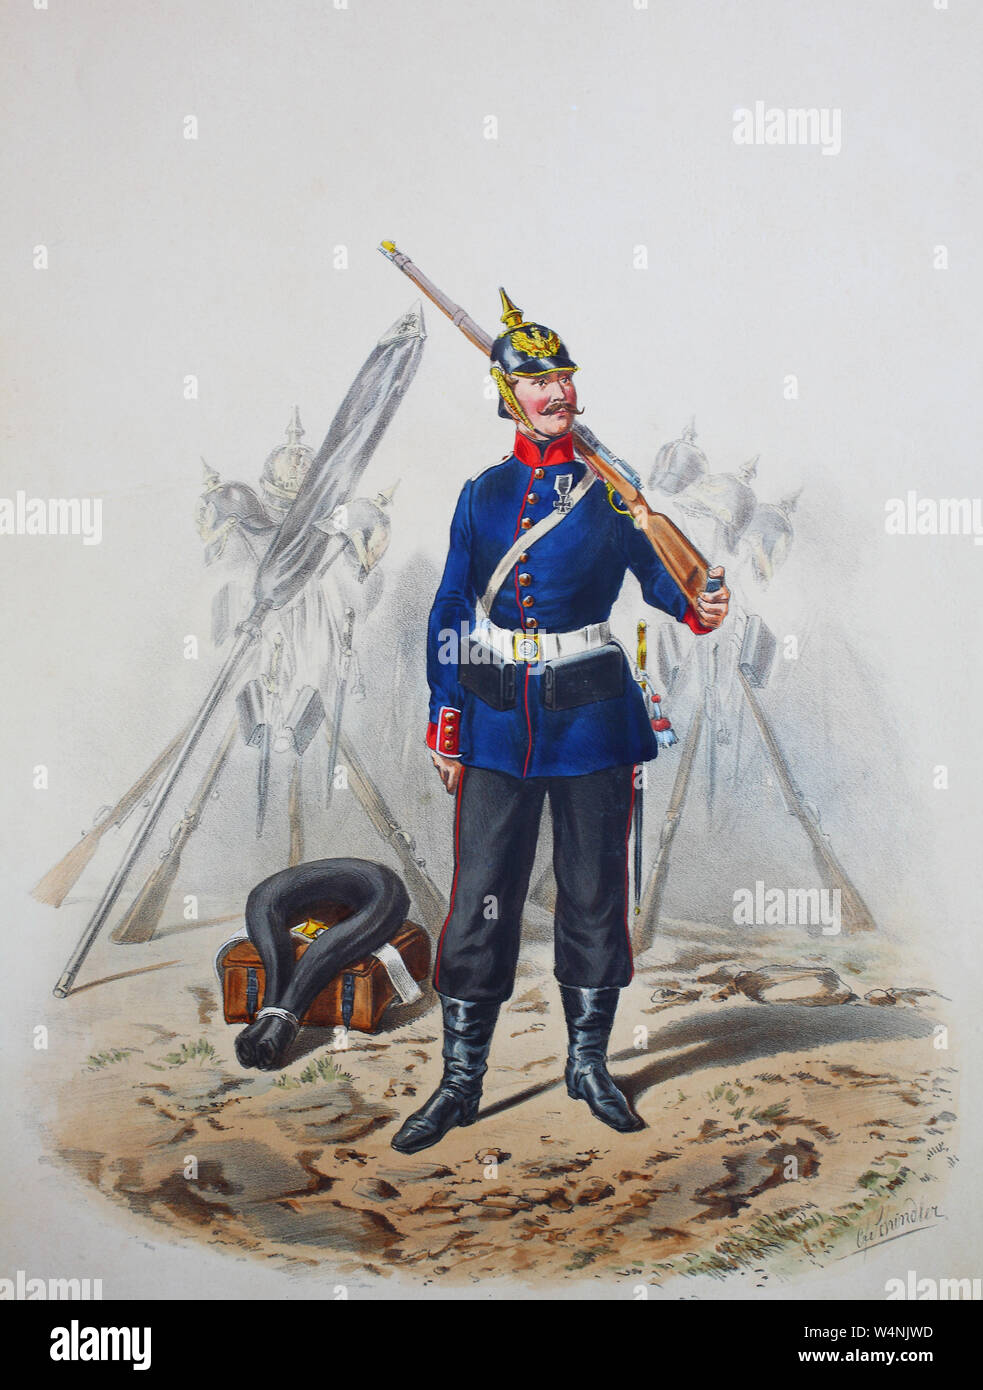 Royal Prussian Army, Guards Corps, Preußens Heer, preussische Garde, Grenadier-Regiment Kronprinz, 1. Ostpreussisches Regiment, Digital improved reproduction of an illustration from the 19th century Stock Photo